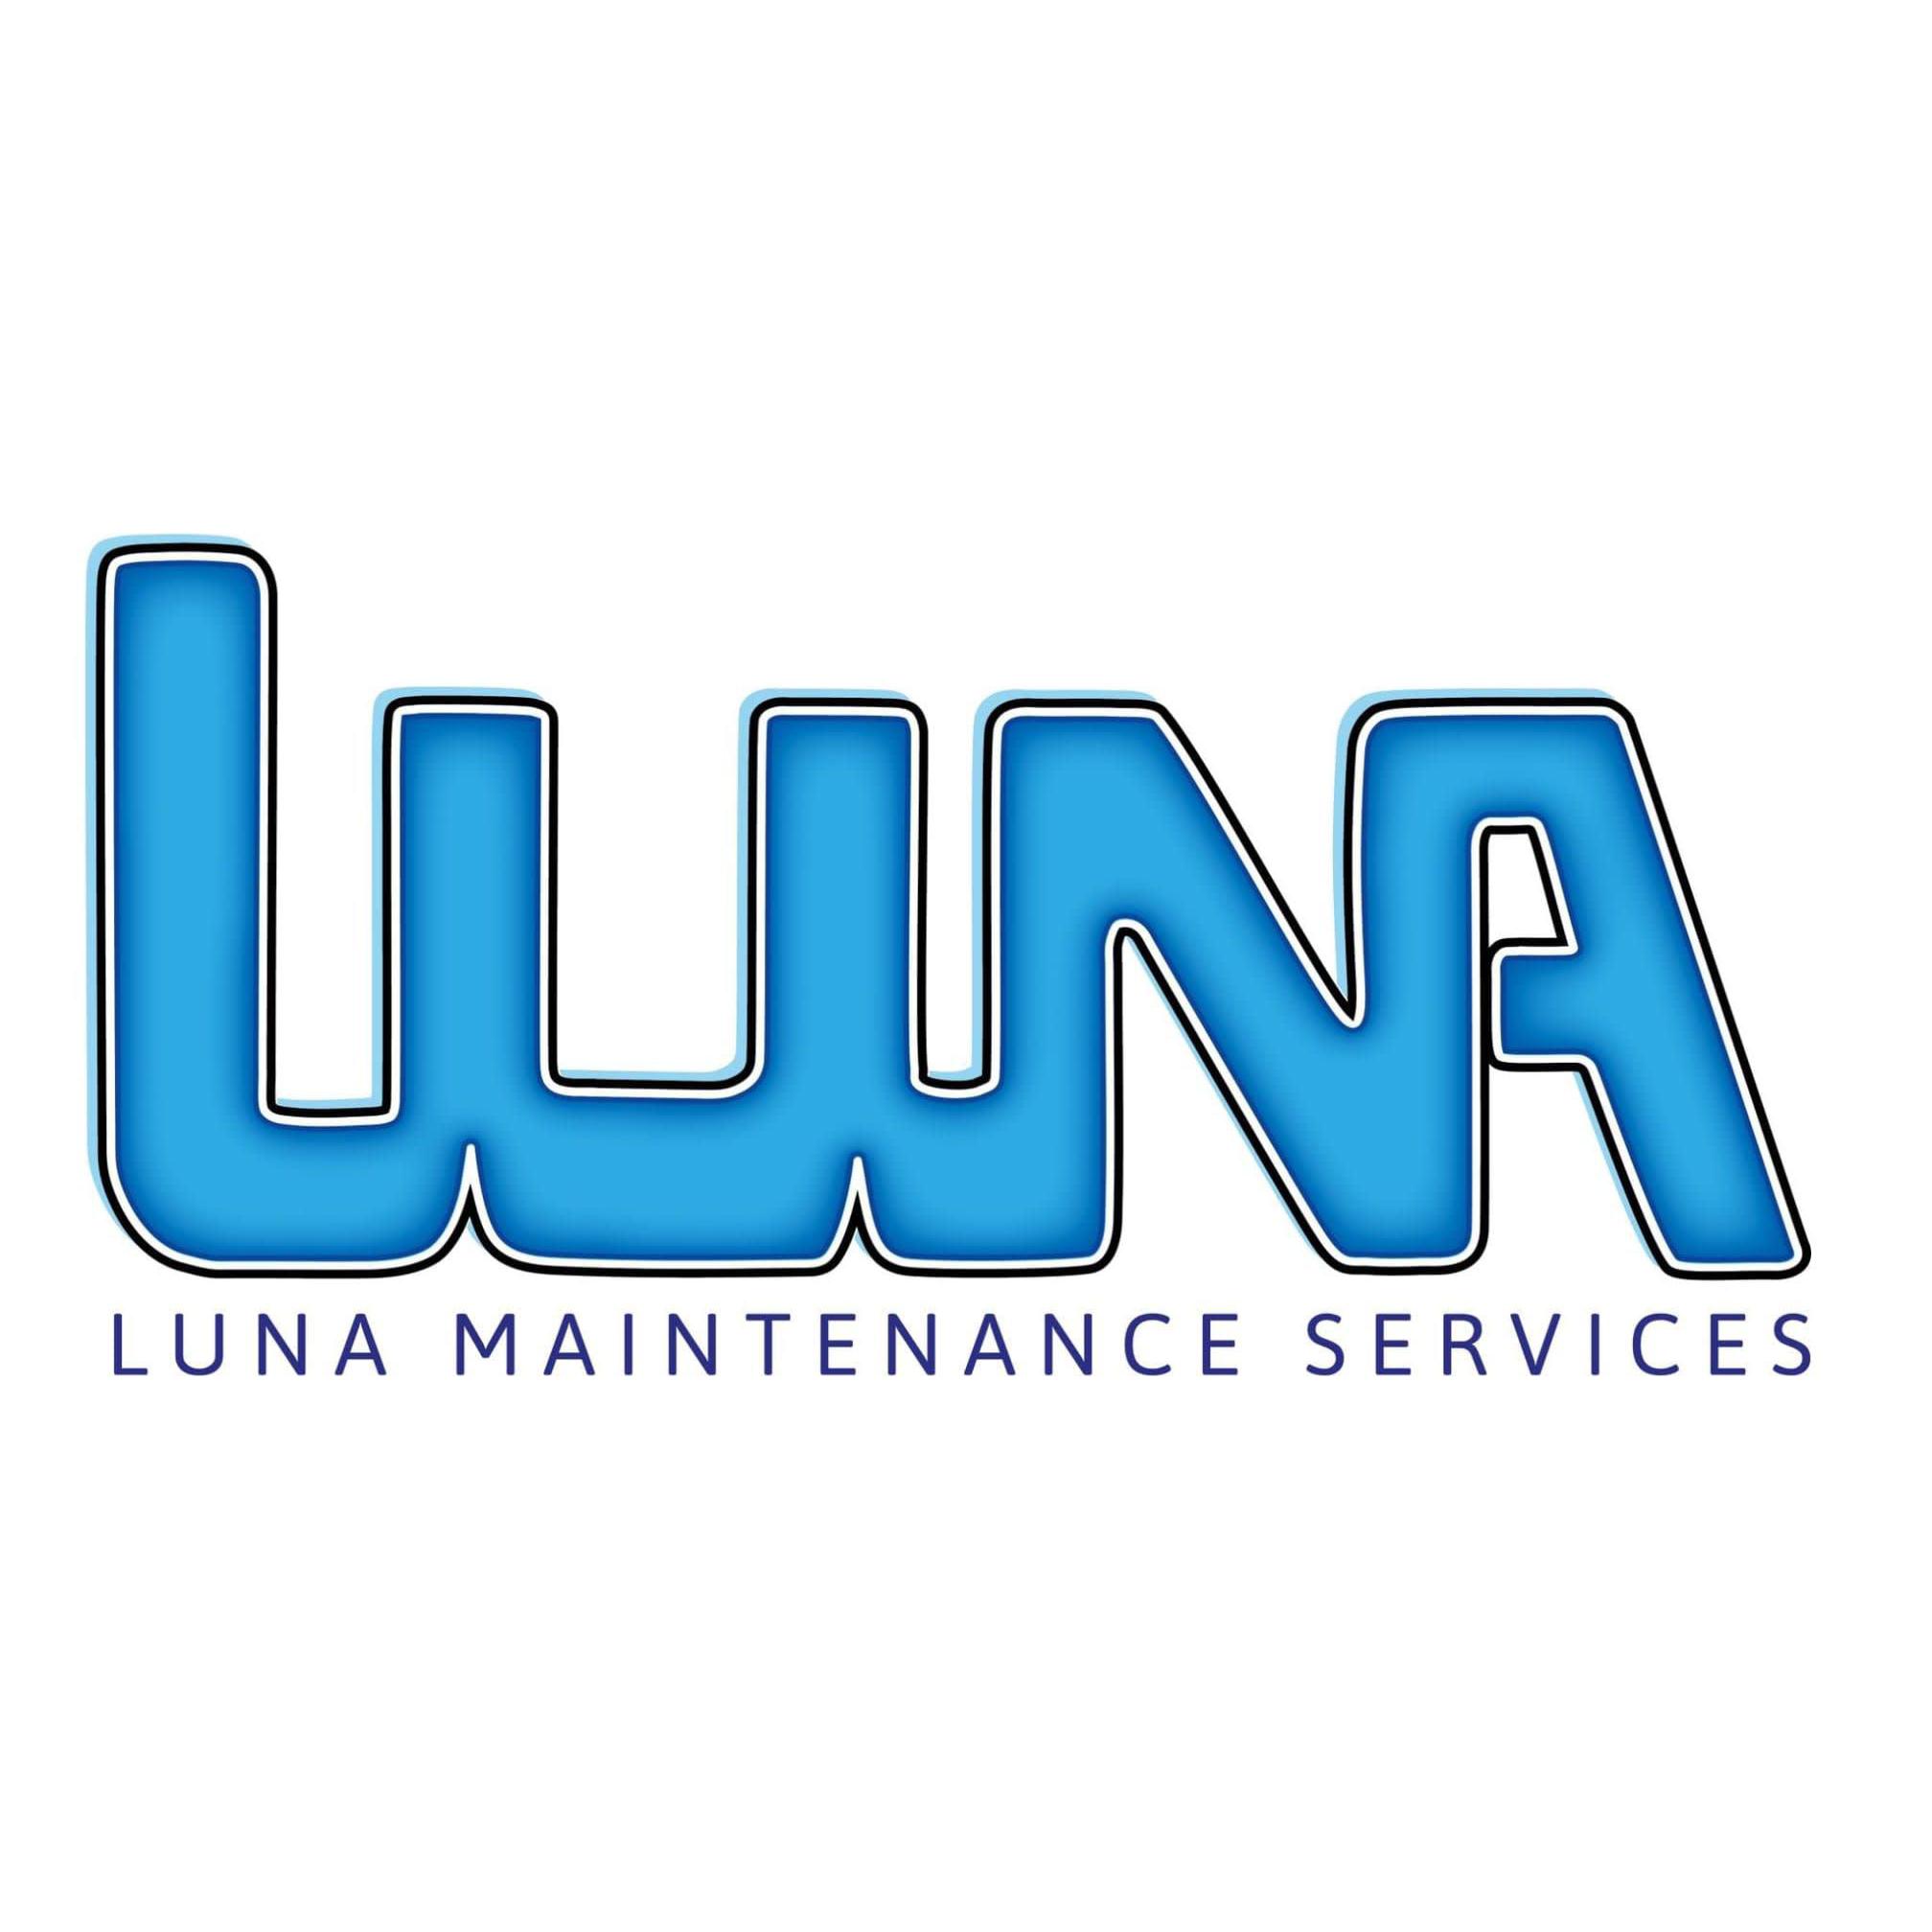 LuNa Maintenance Services - Keighley, West Yorkshire BD20 5AT - 07557 398079 | ShowMeLocal.com